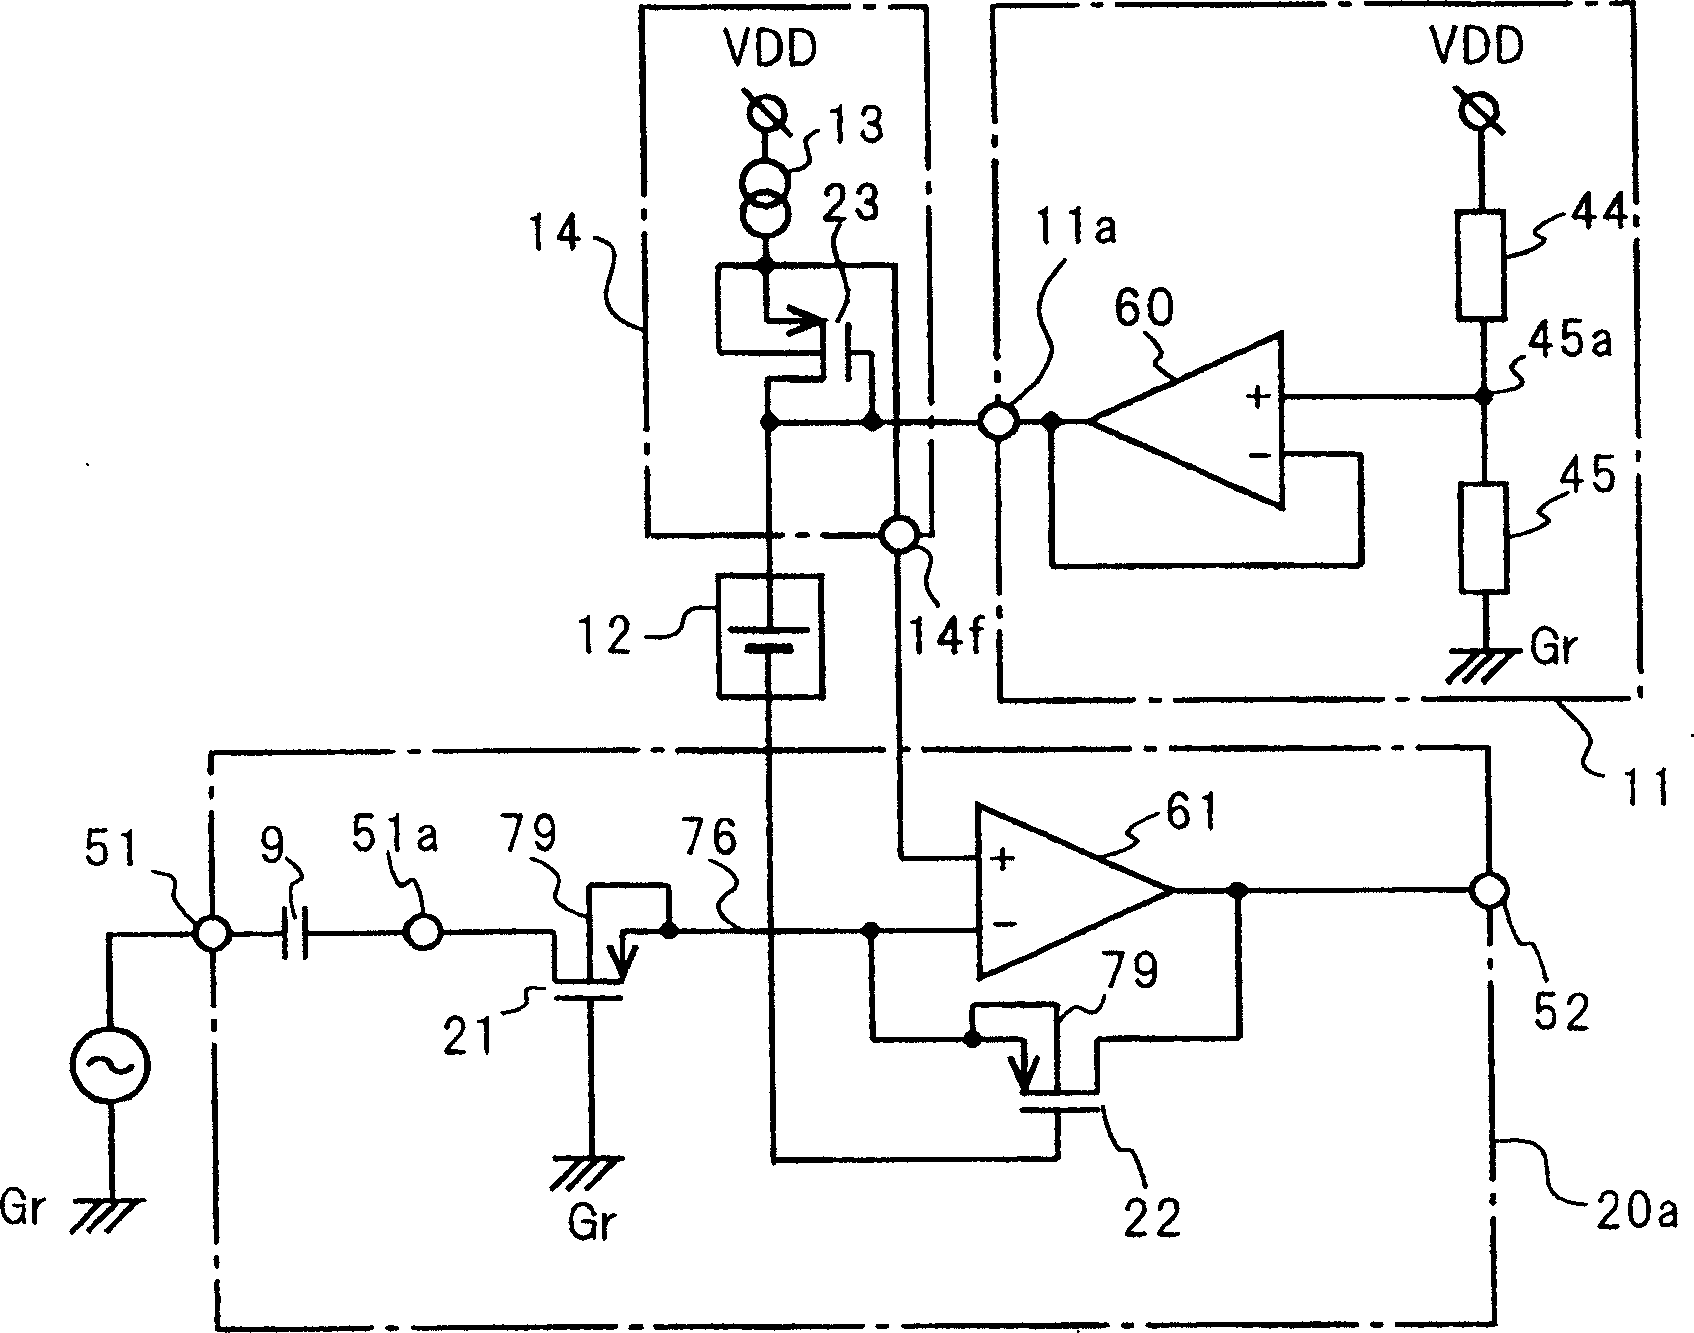 Amplifier with gain in direct proportion to power voltage